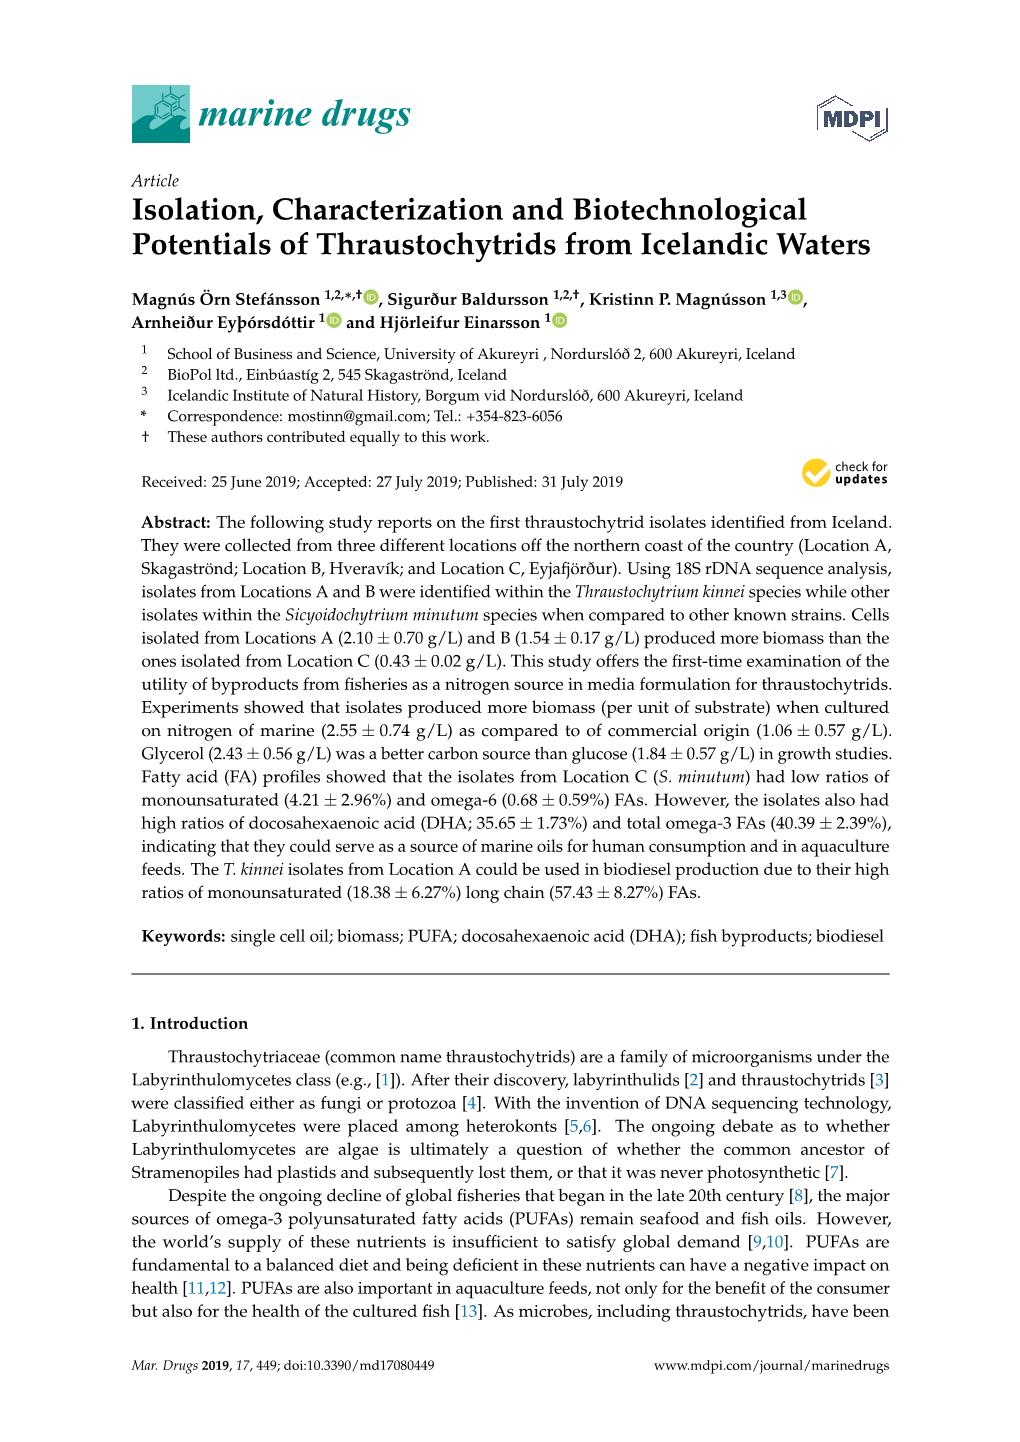 Isolation, Characterization and Biotechnological Potentials of Thraustochytrids from Icelandic Waters